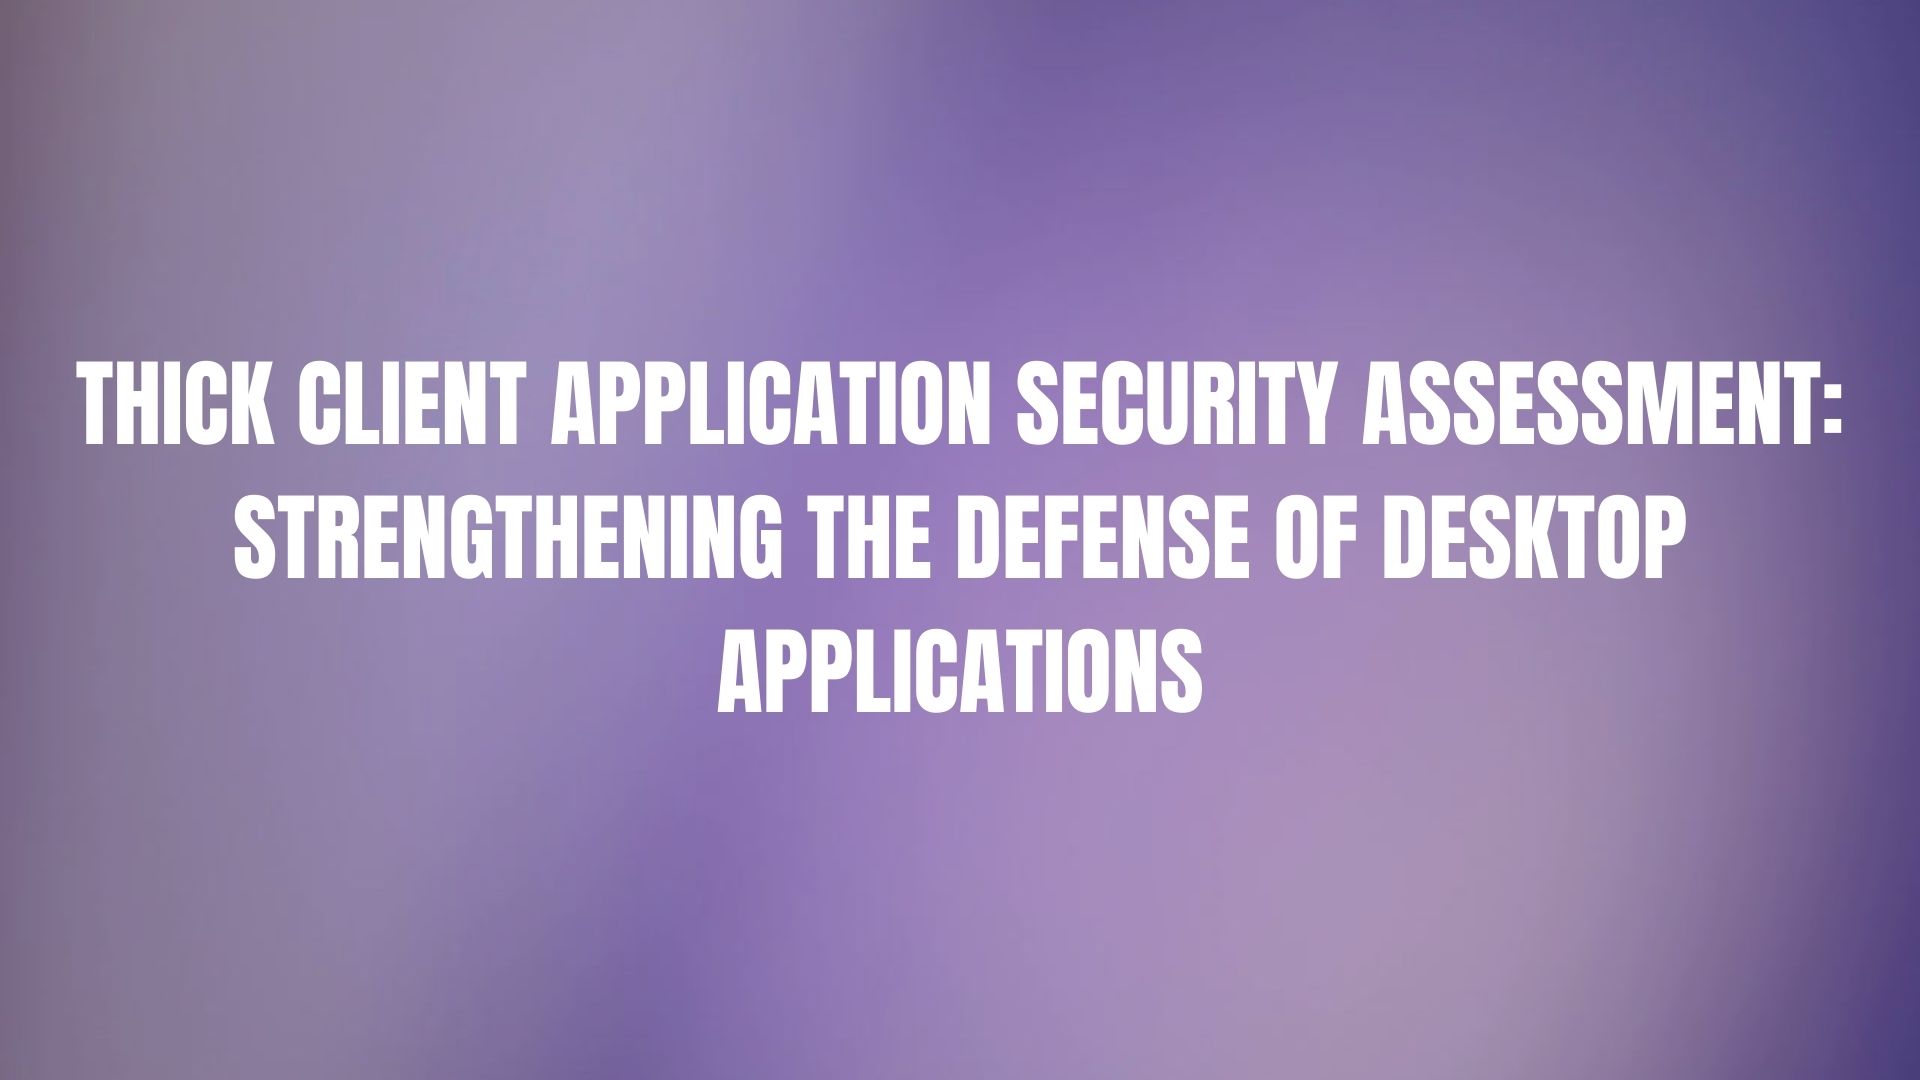 Thick Client Application Security Assessment Strengthening the Defense of Desktop Applications